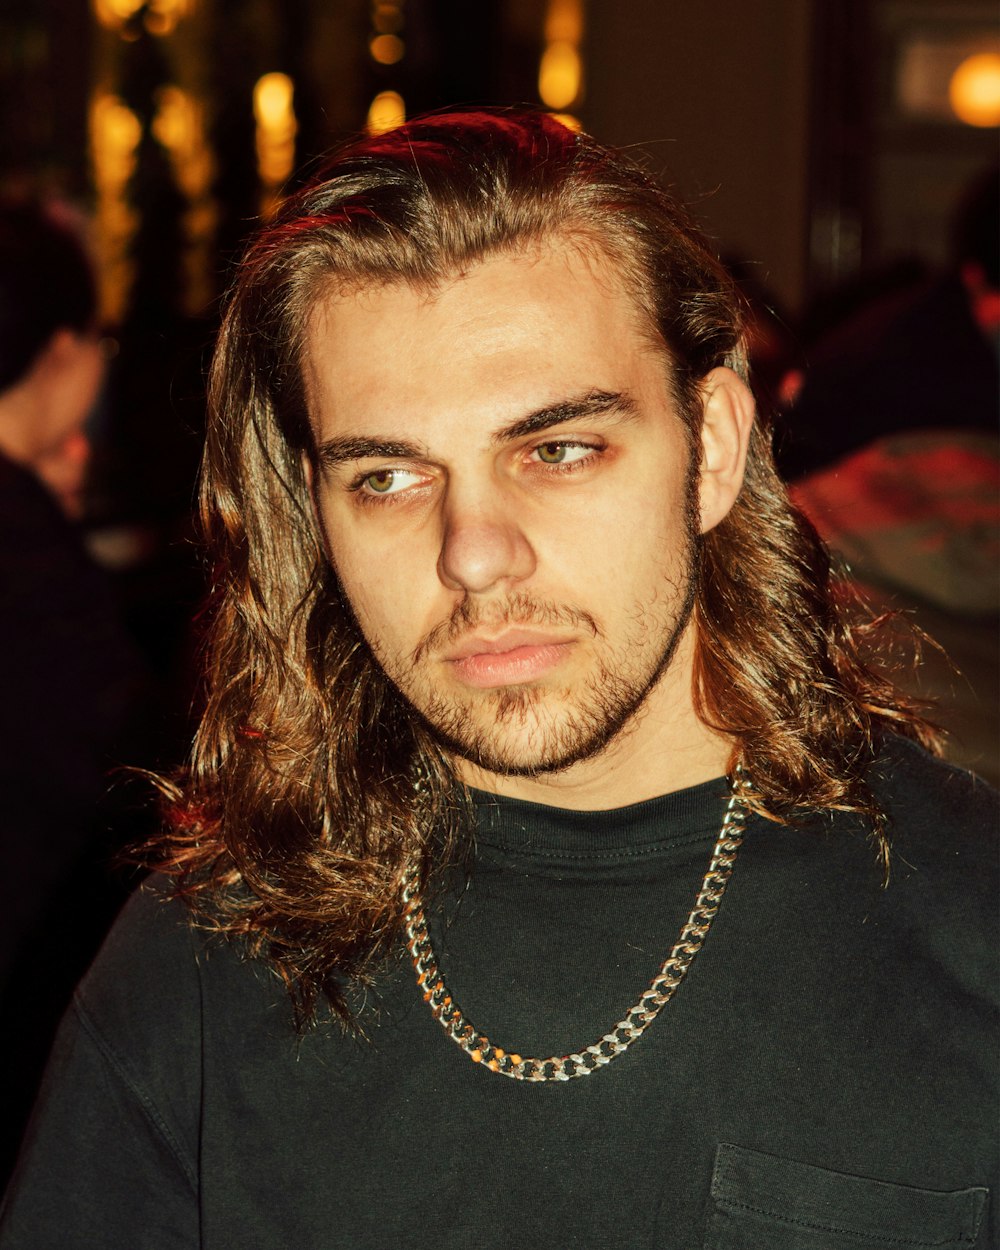 a man with long hair and a chain around his neck